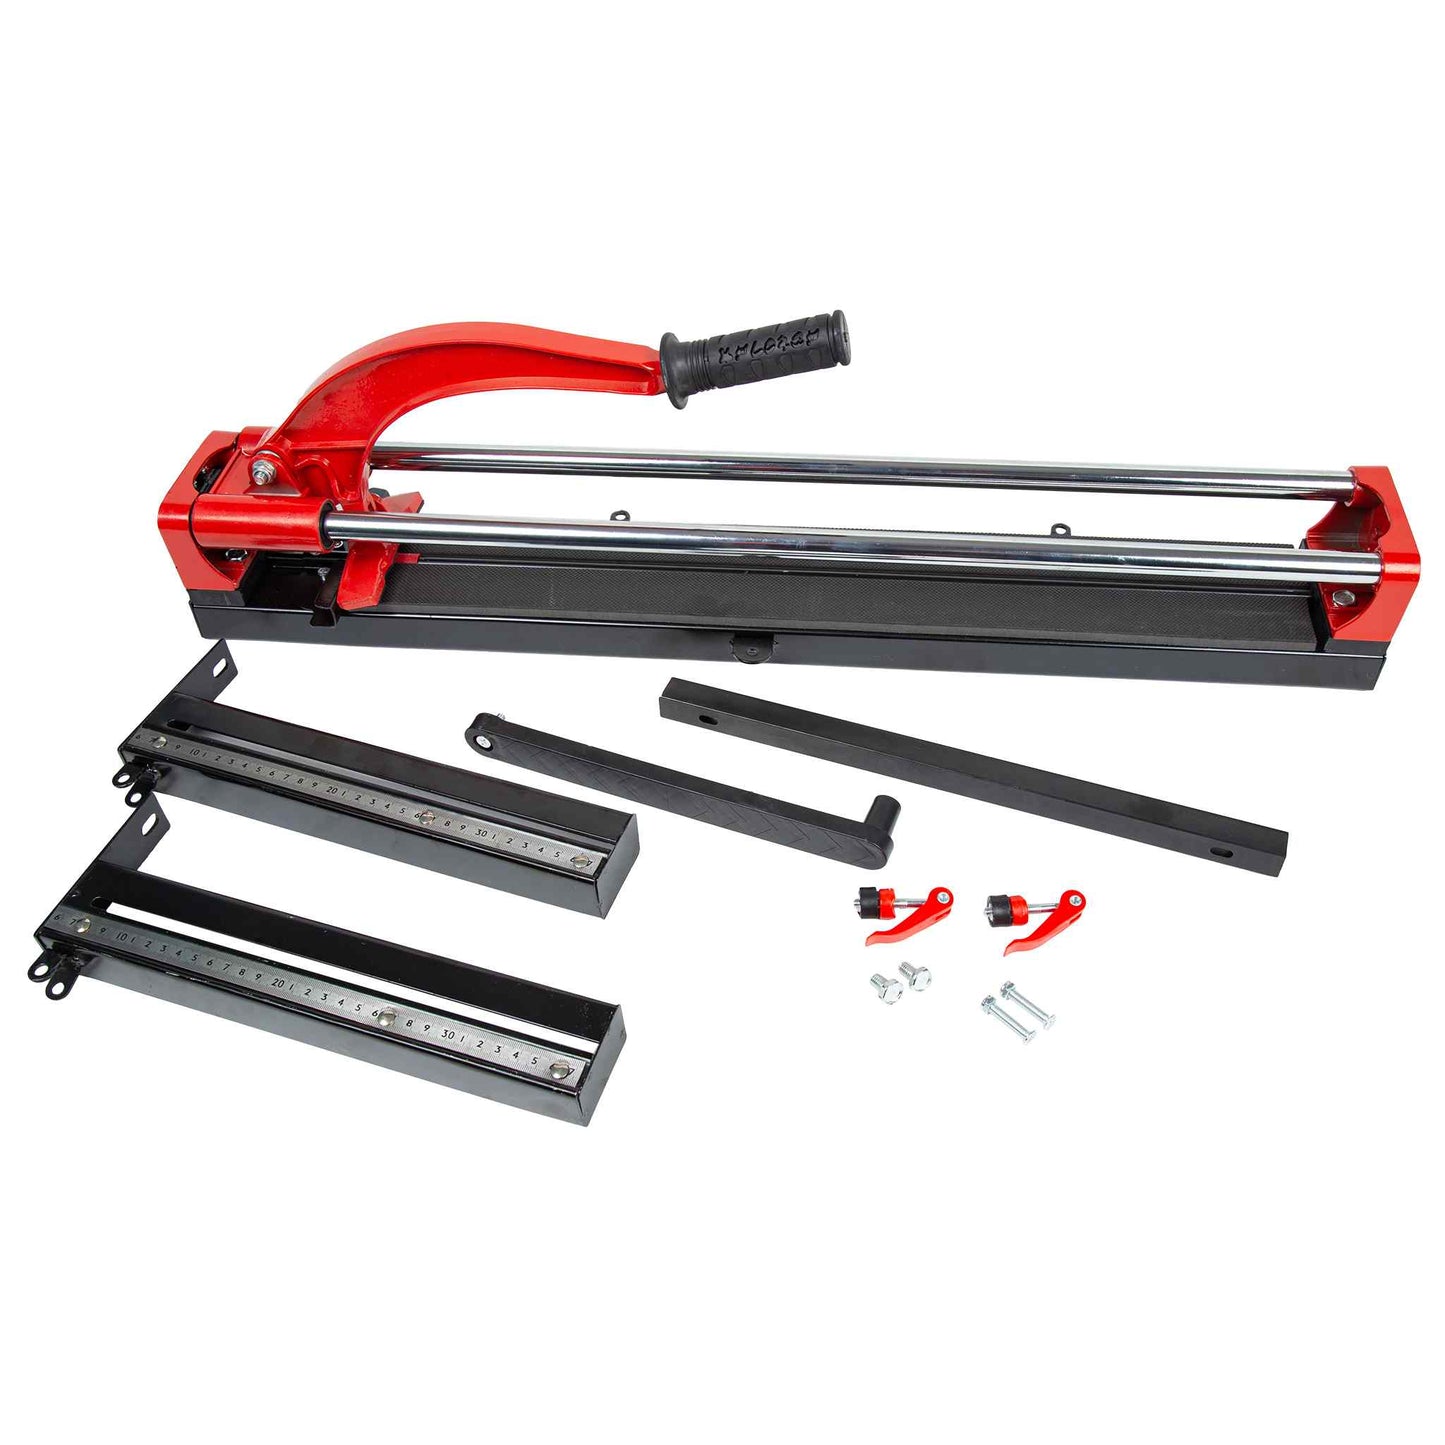 Zaptec FAST-600 Manual Tile Cutter for Tiles Up to 2 Feet